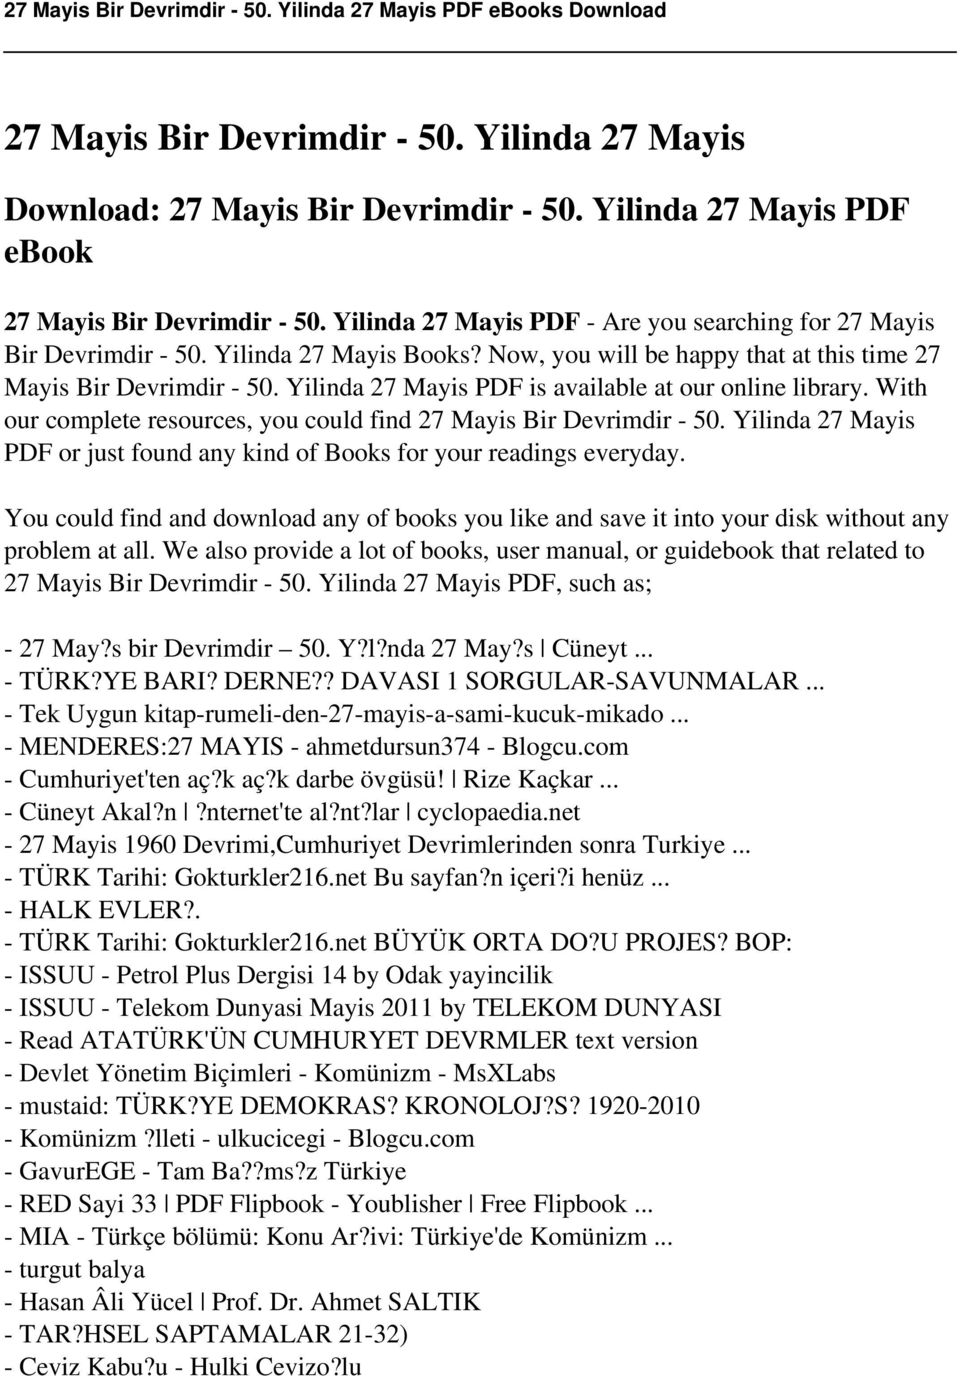 Yilinda 27 Mayis PDF is available at our online library. With our complete resources, you could find 27 Mayis Bir Devrimdir - 50.